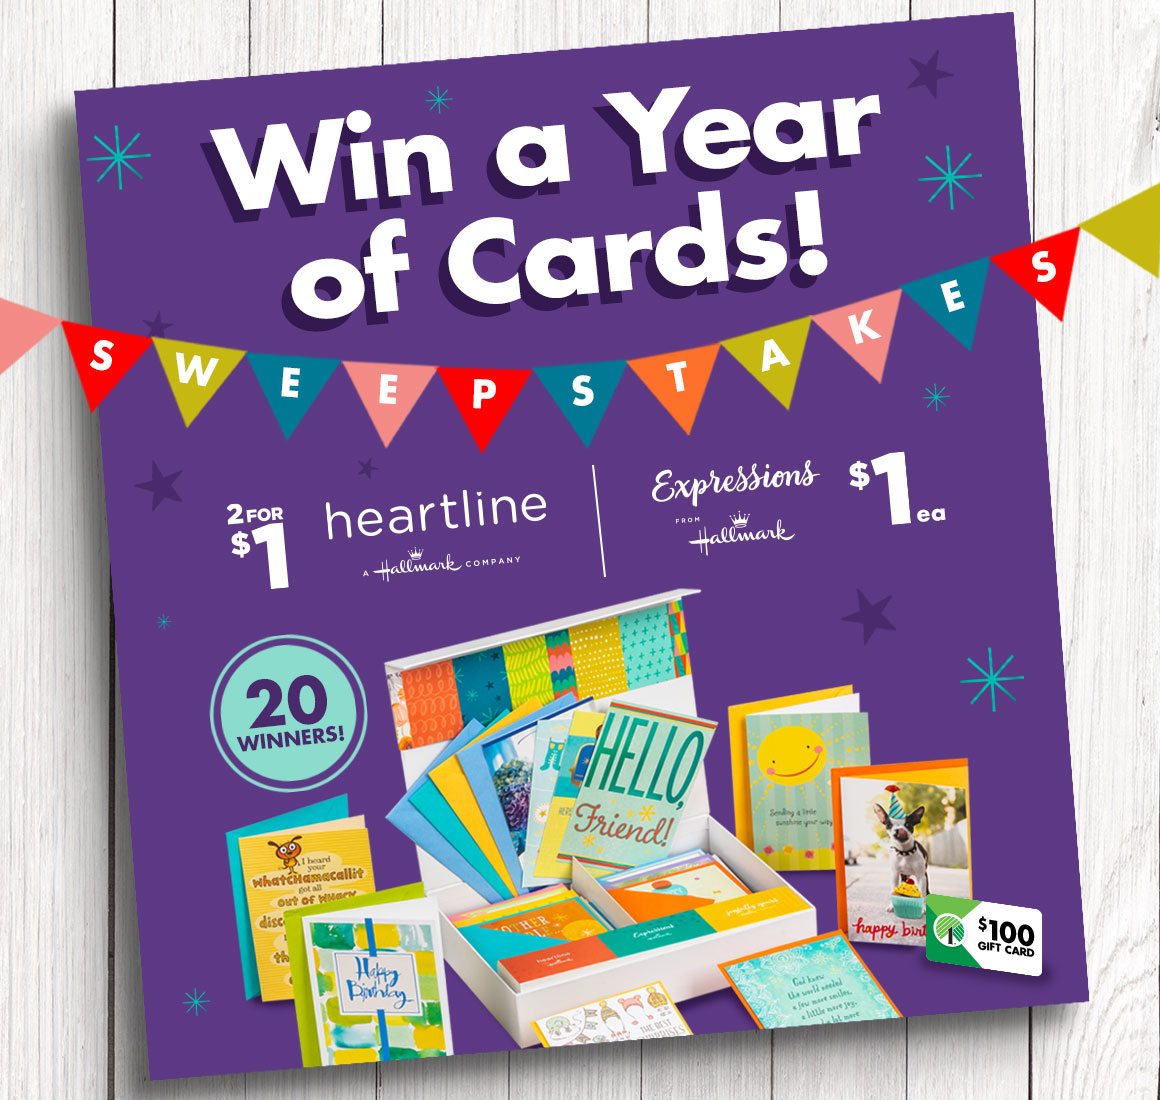 Enter our Sweepstakes for a Chance to Win* a Year’s Supply of Cards and a $100 Dollar Tree Shopping Spree!